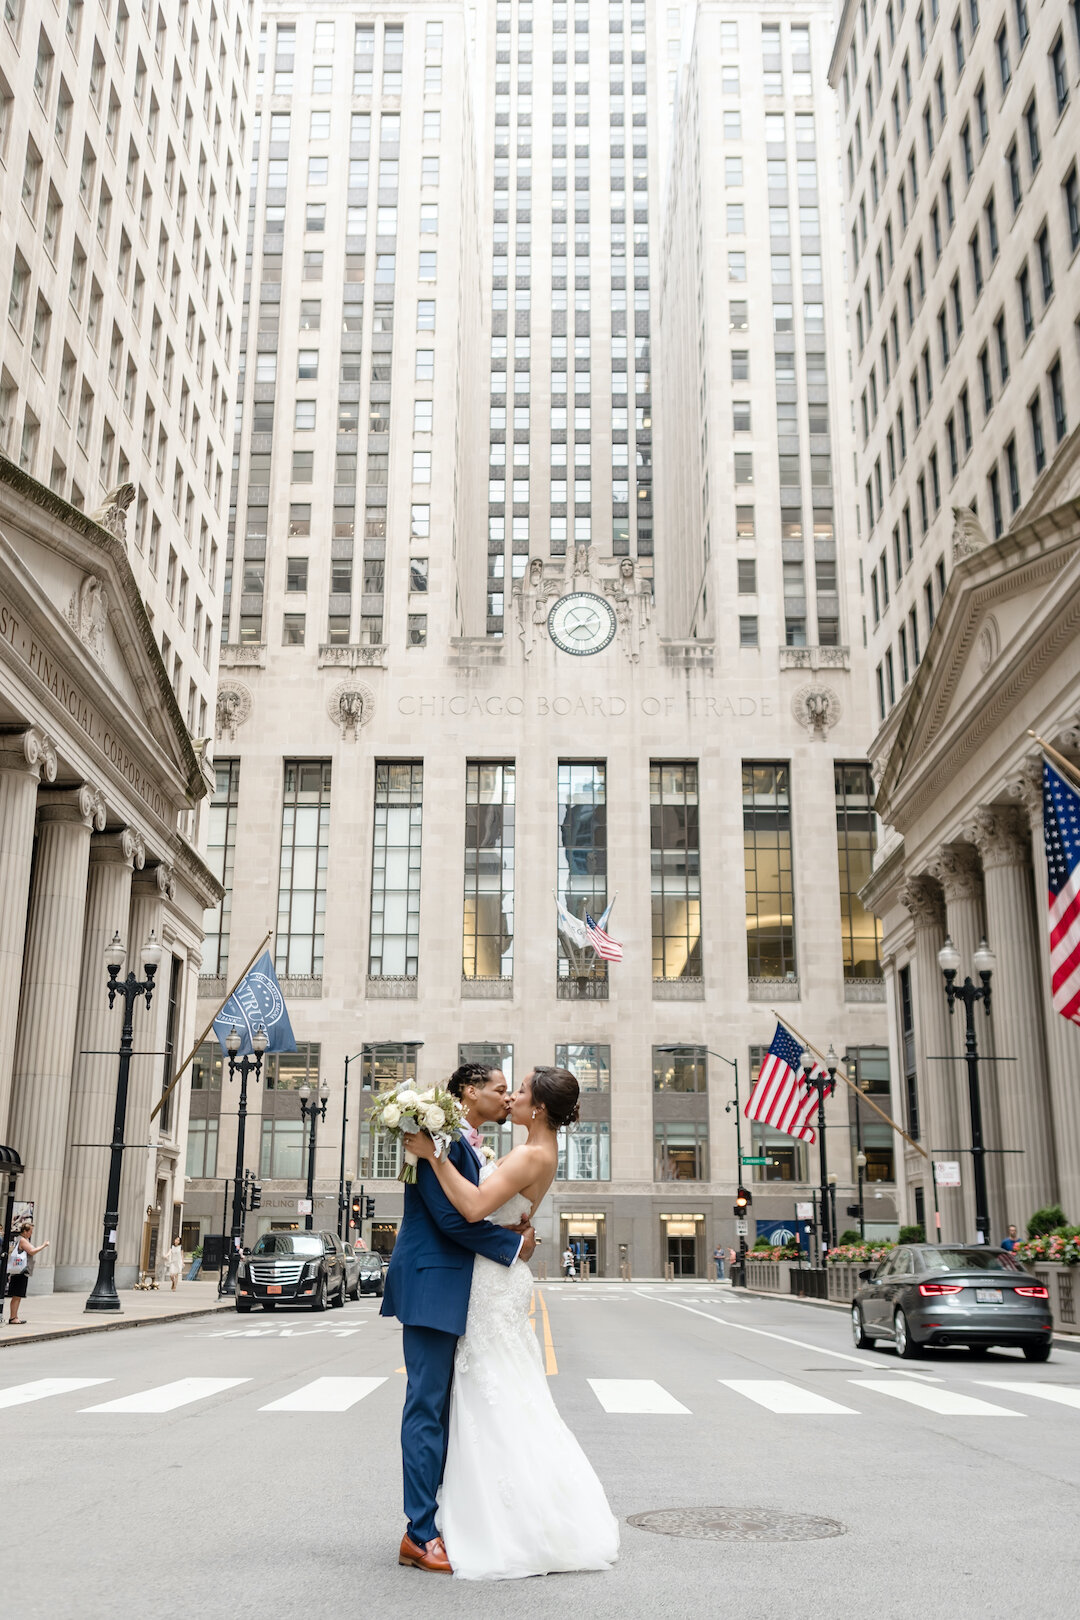 Romantic Chicago wedding at Room 1520 captured by Something Blue Photography Designed. See more elegant wedding ideas at CHItheeWED.com!